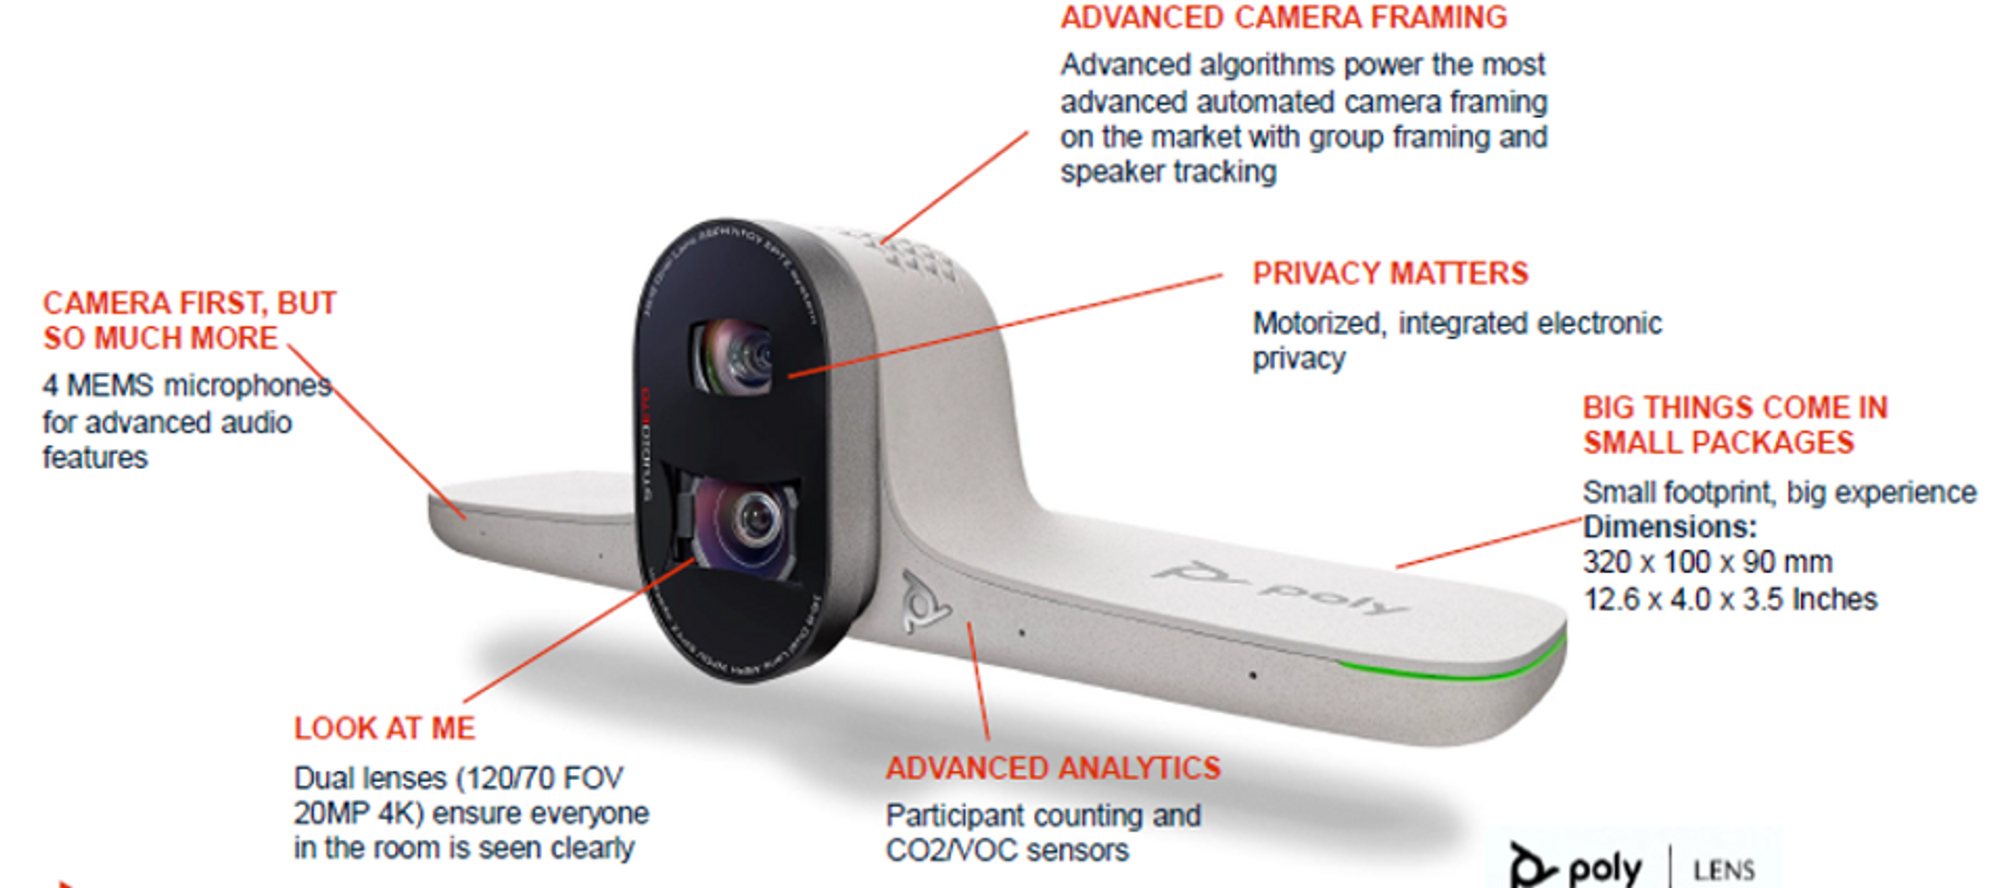 Unlock Seamless Video Conferencing: A Quick Guide to the Poly e70 Camera's Smart Features